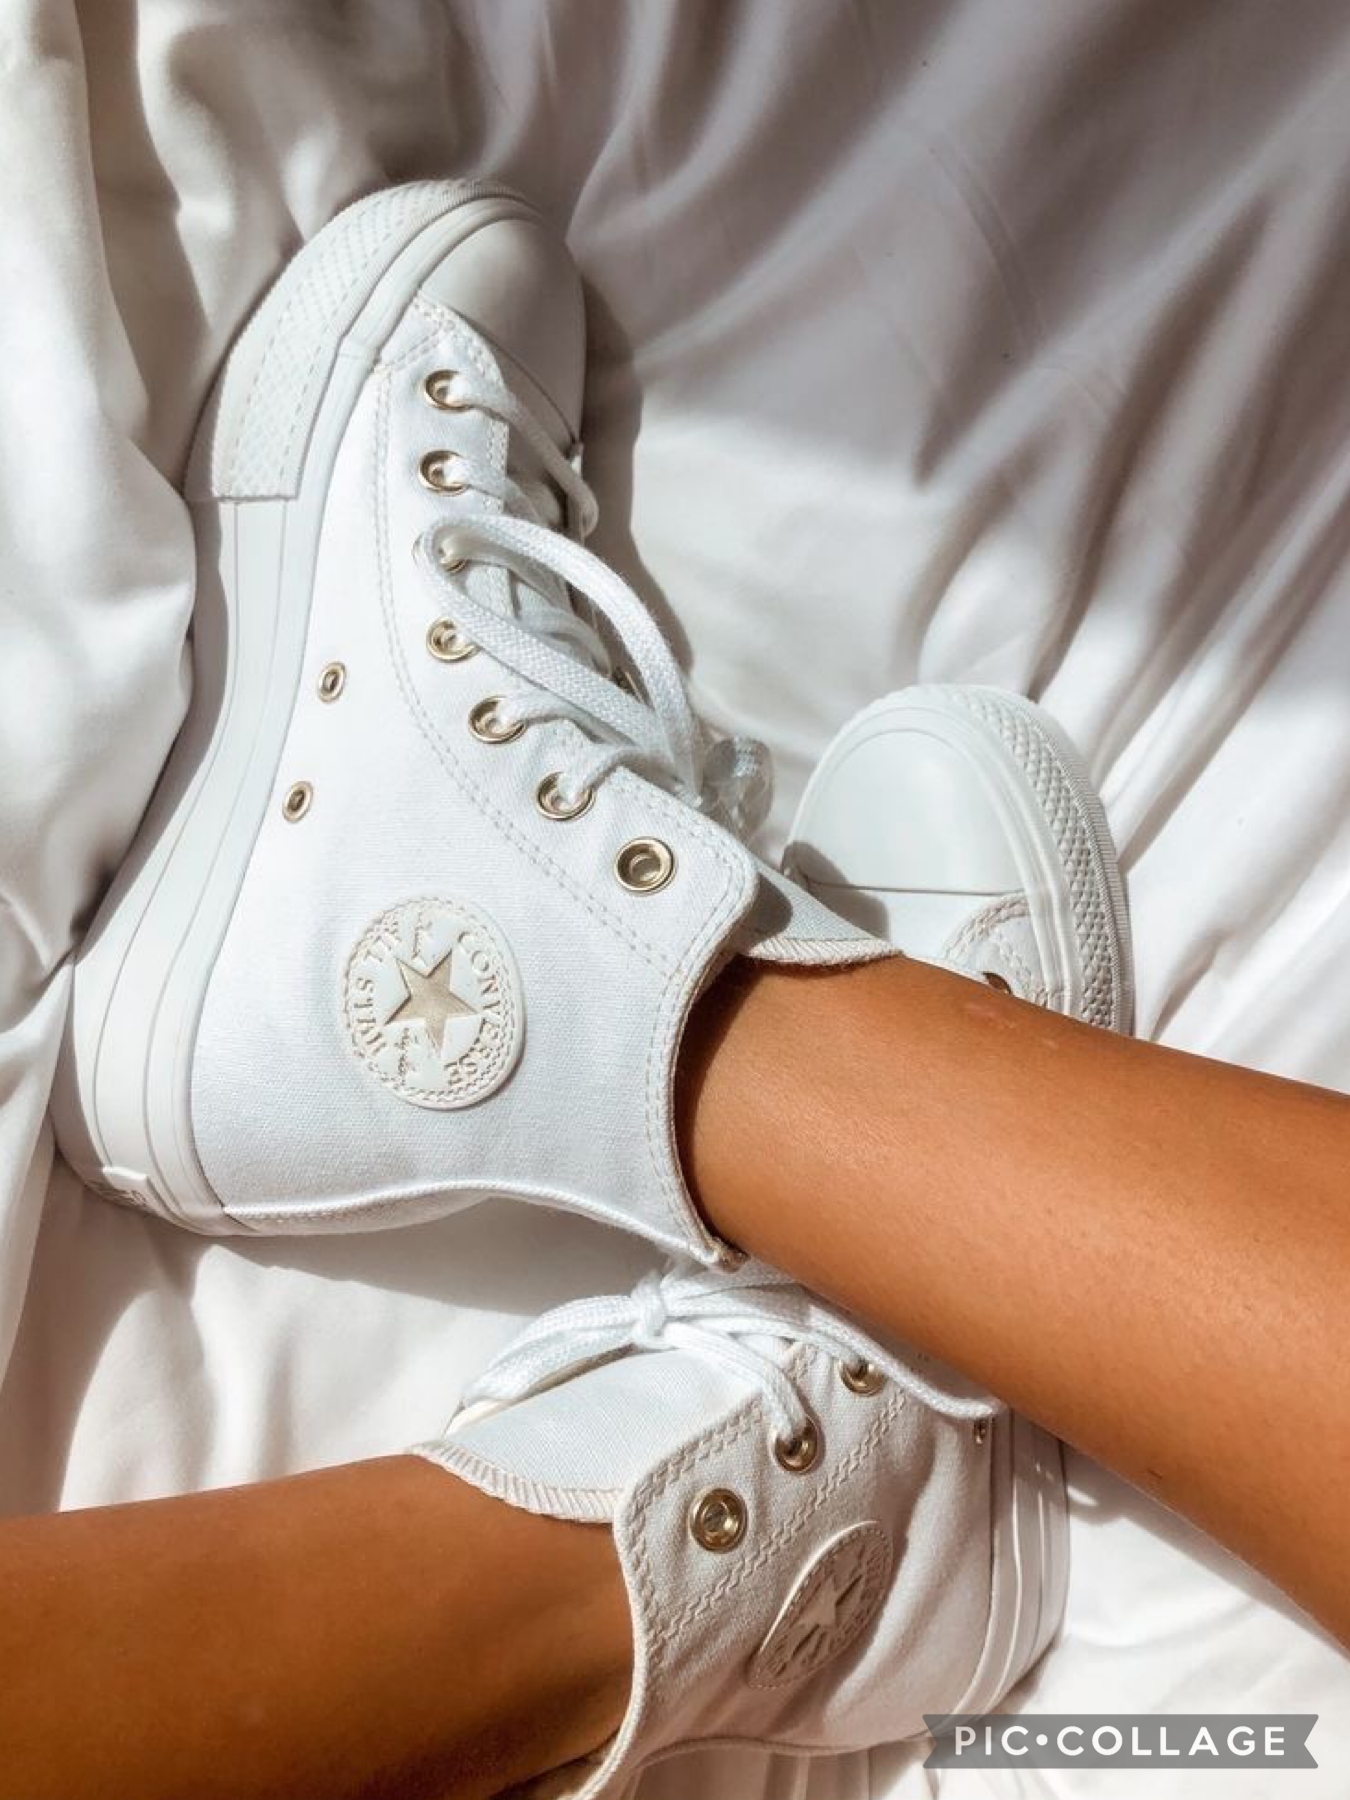 Why are Converse making a comeback after I sell a few pairs of mine🤦🏼‍♀️😅
2-8-21